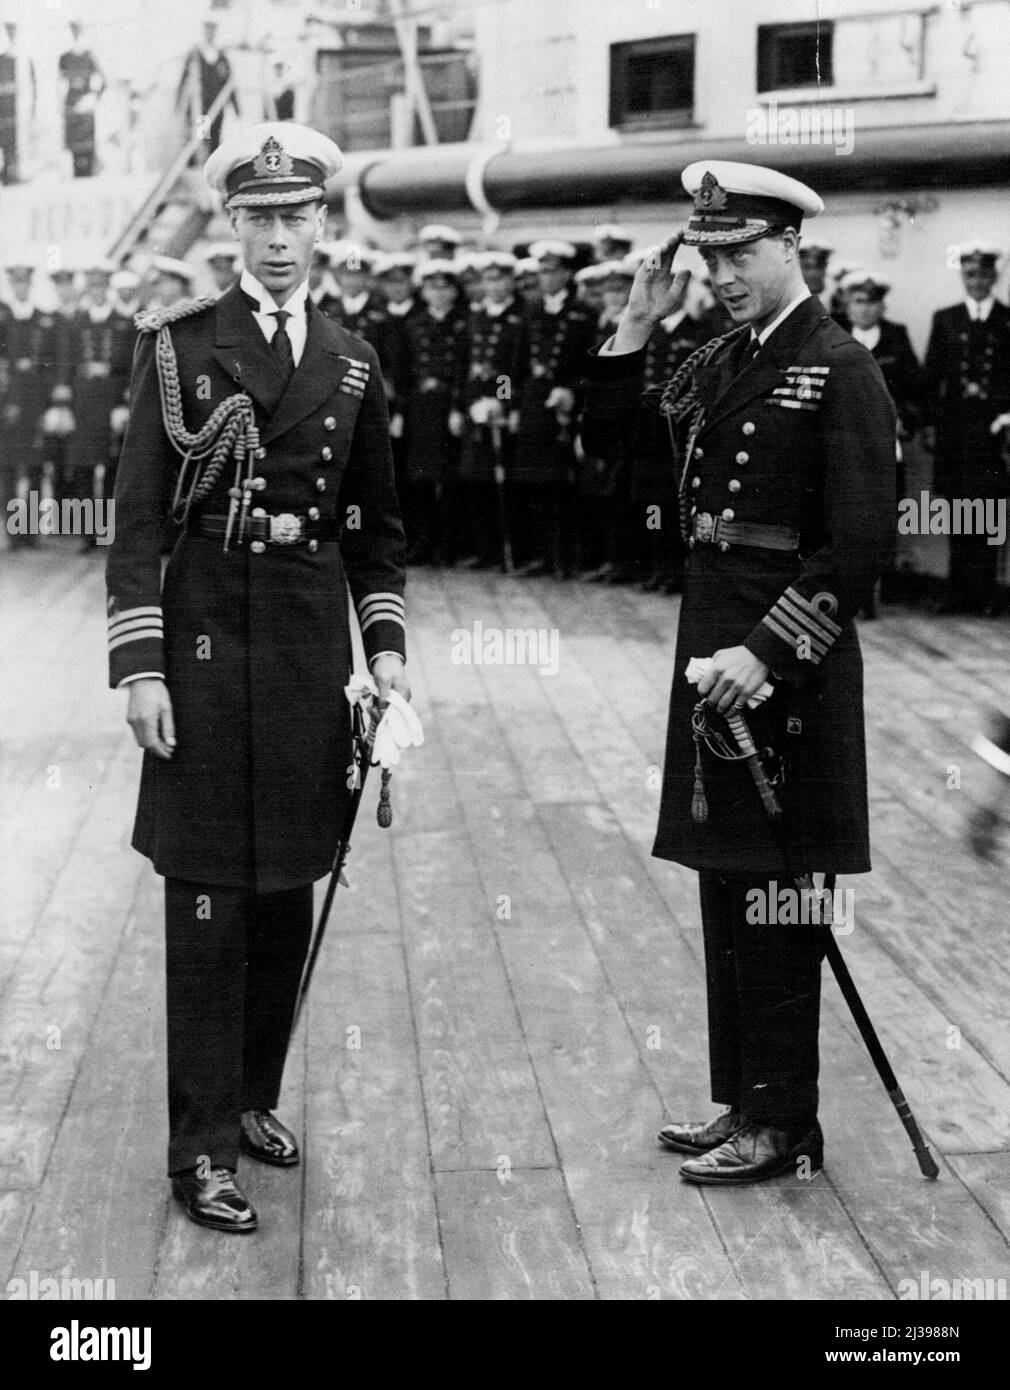 A picture taken aboard the quarter deck of the battleship Renown at Plymouth, showing the Prince of Wales (later King Edward VIII) - at right - saluting, and his brother, the Duke of York, now King George VI. Pictured was in connection with the Prince of Wale's tour of Japan and the East. June 21, 1922. (Photo by Reuterphoto). Stock Photo